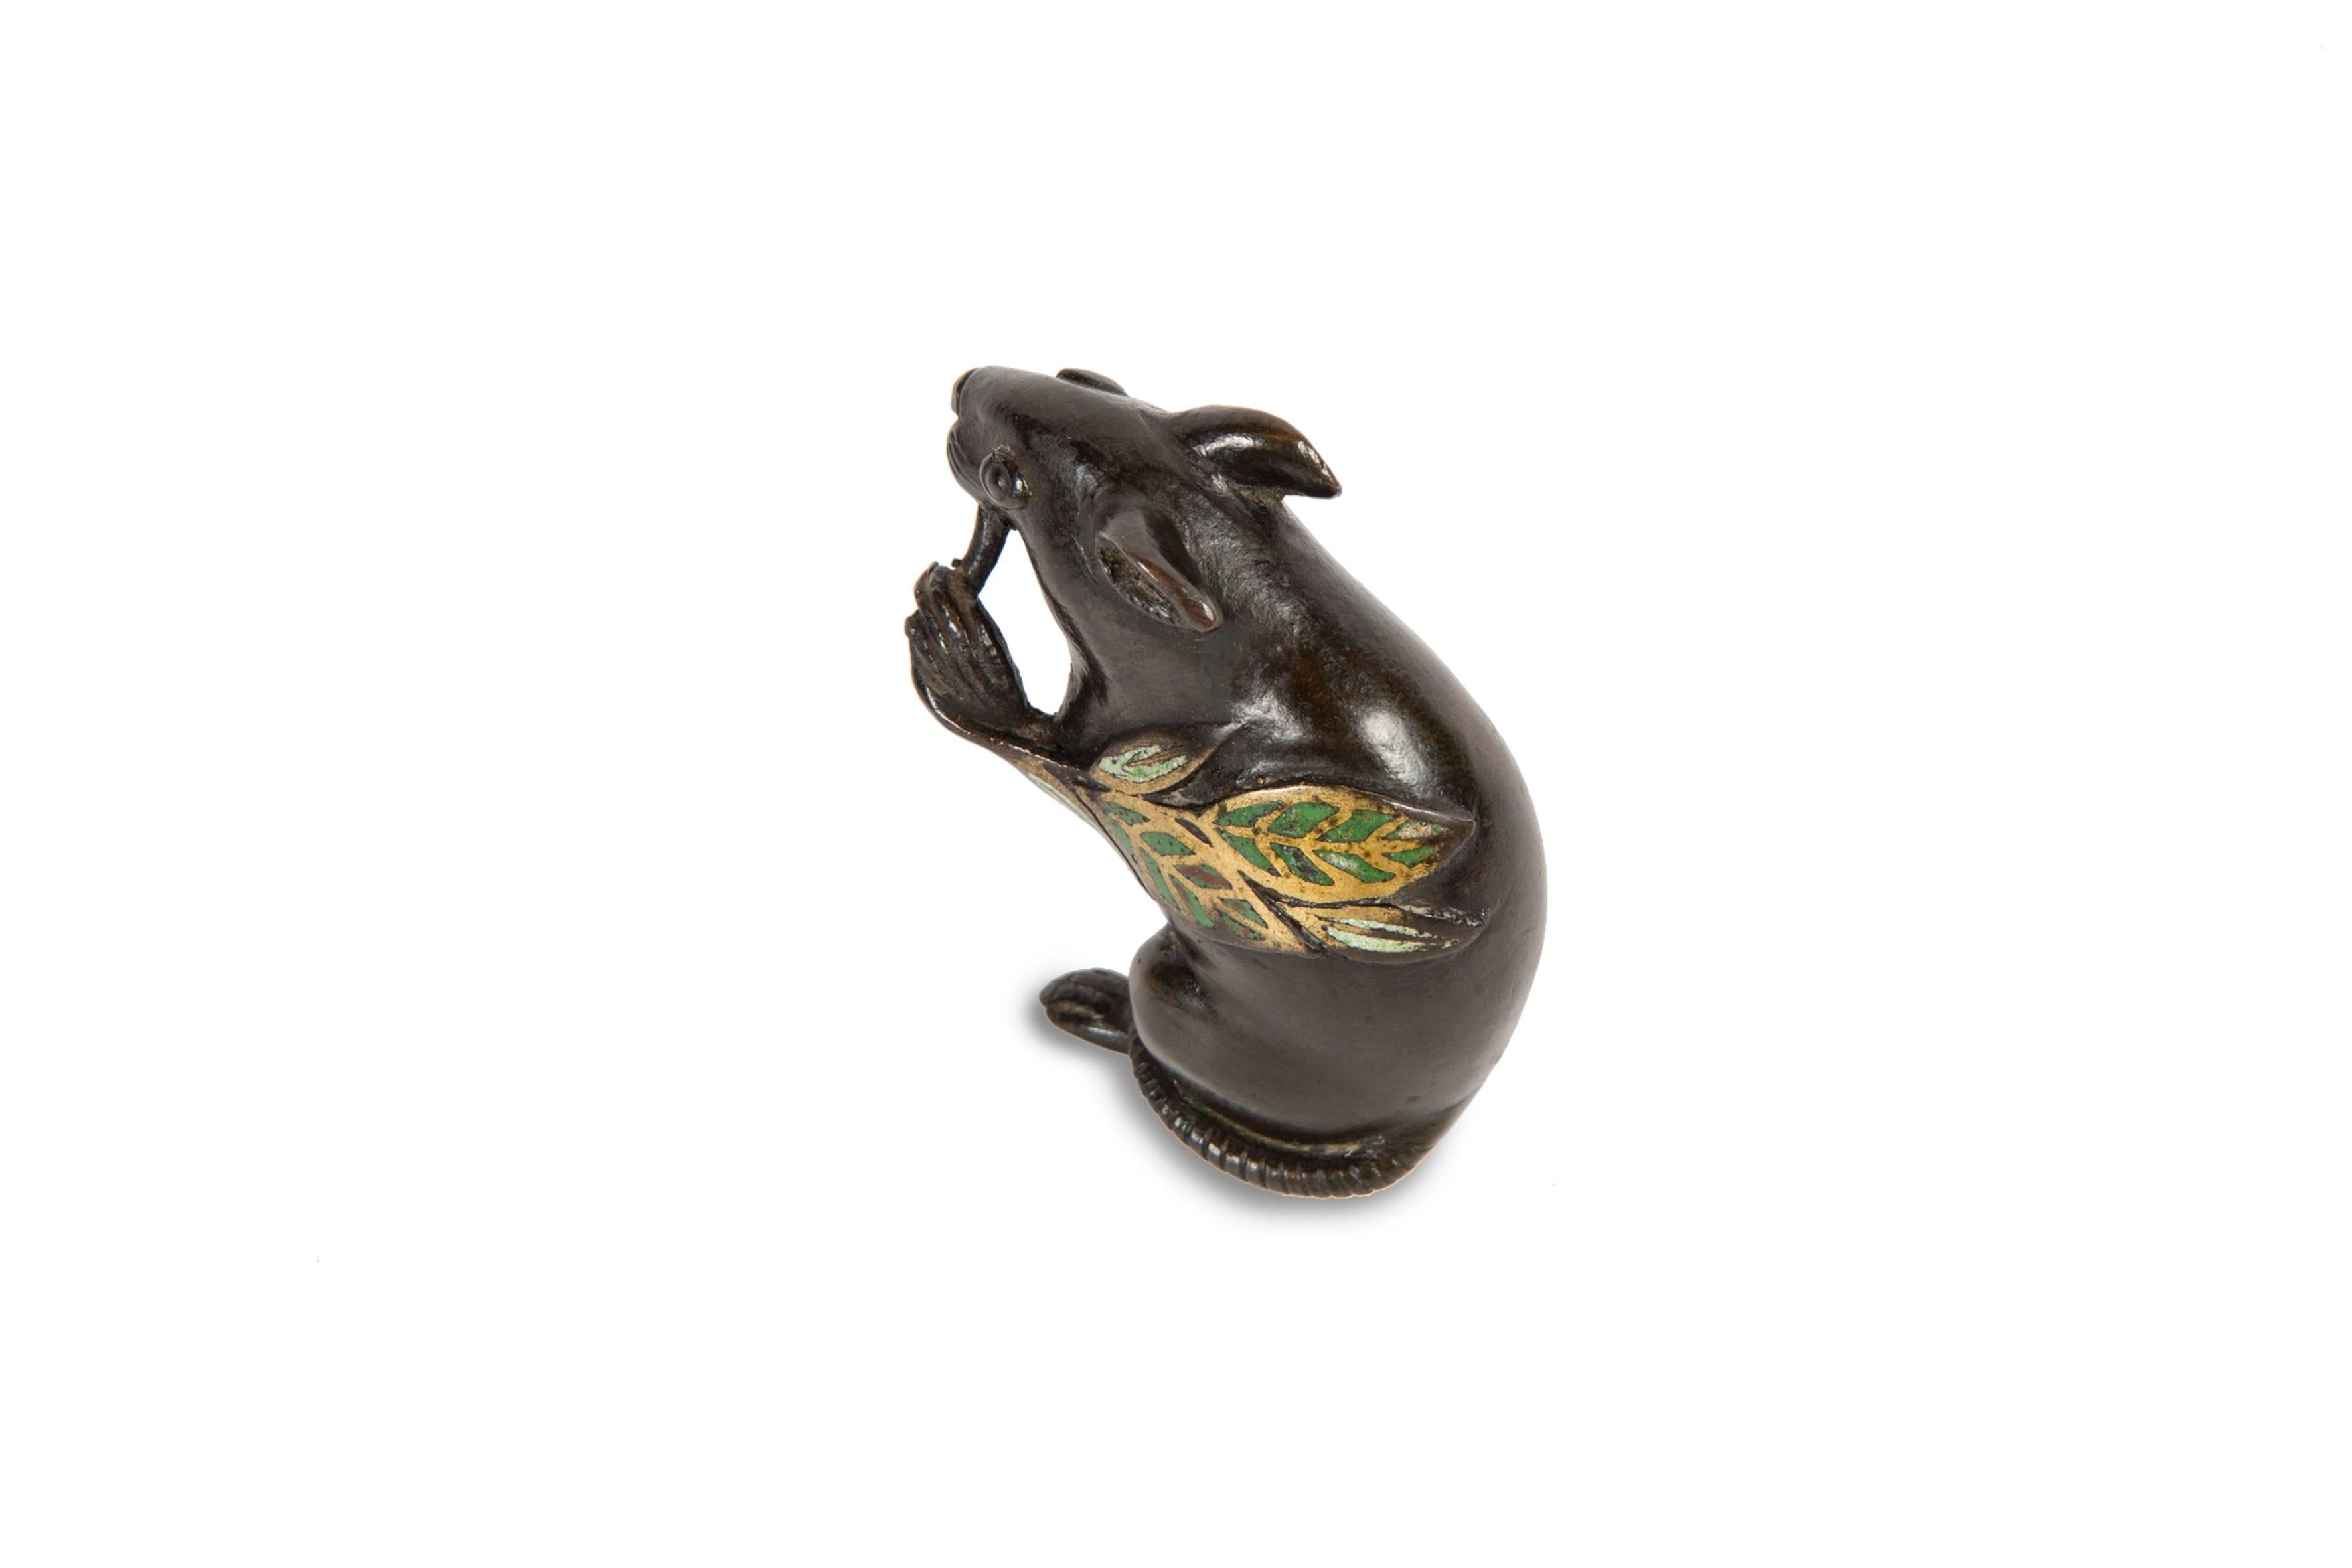 Small bronze representing a mouse nibbling branches in enameled cloisonné,
Japan, early 20th century.
Measures: Height 7 cm, length 4 cm, width 6 cm.
 